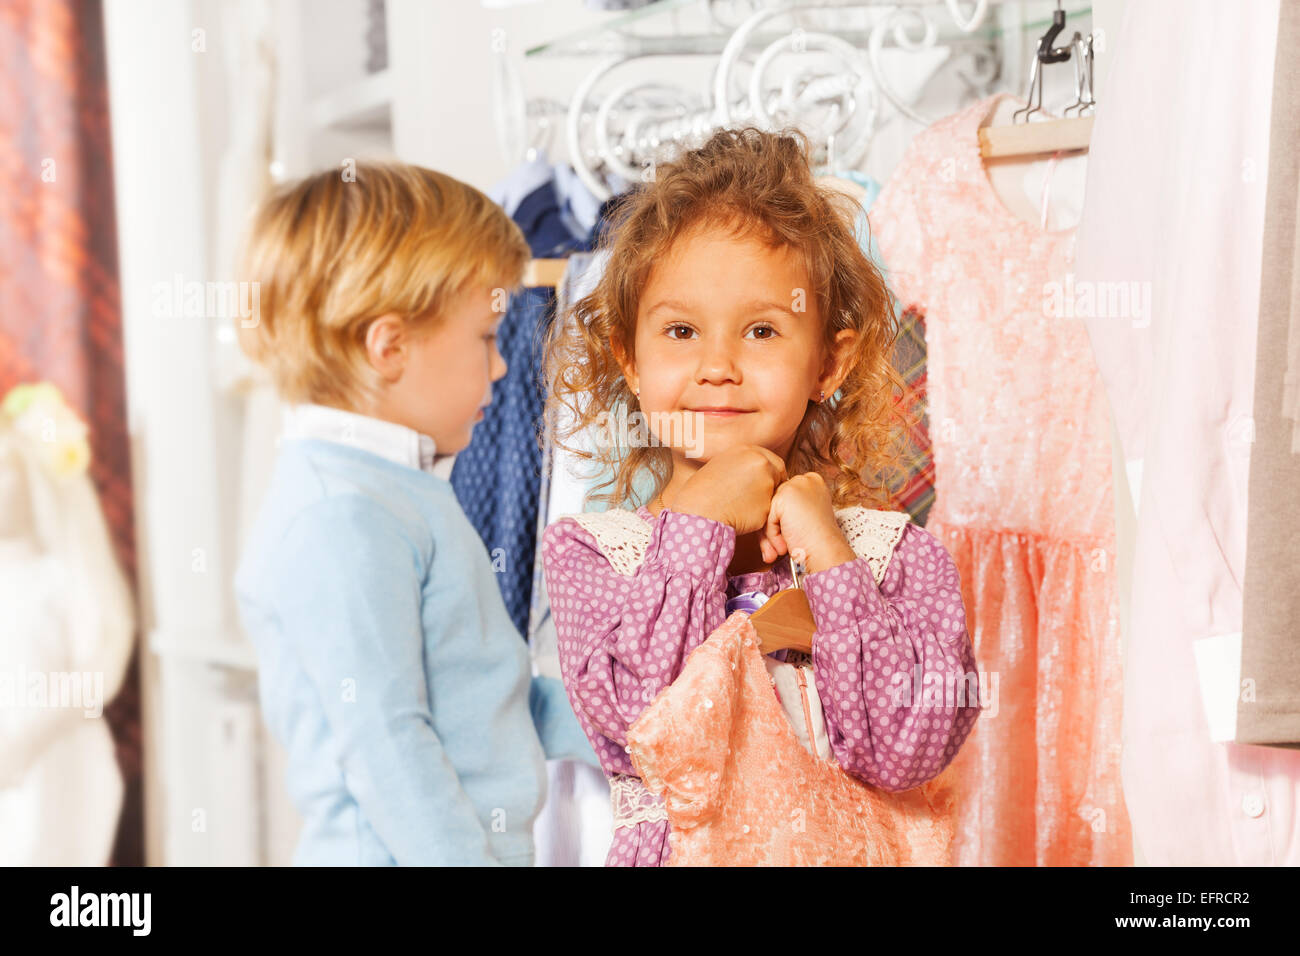 Girl with dress and boy behind choosing clothes Stock Photo